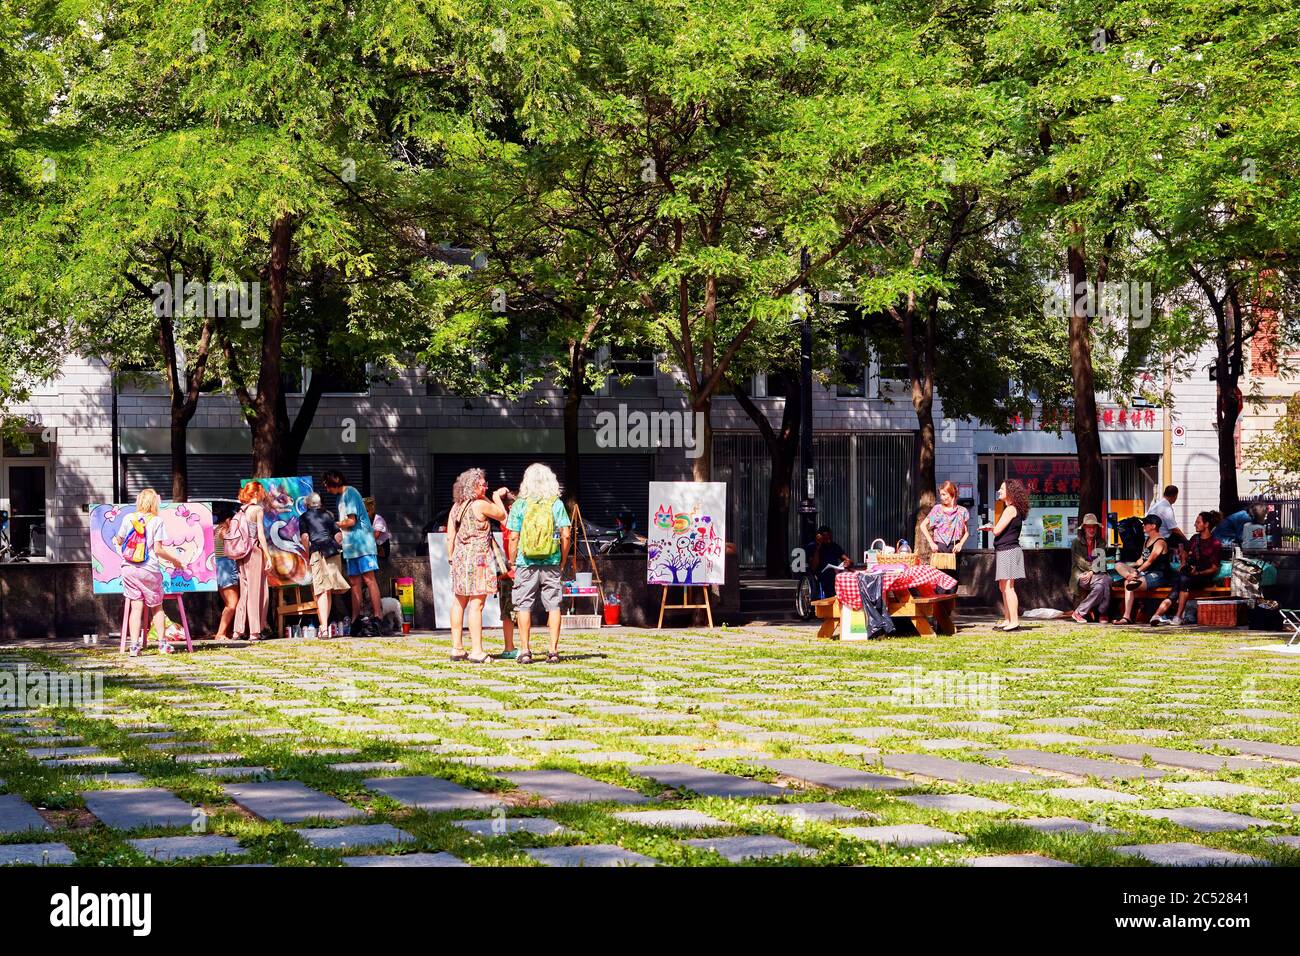 Montreal, Canada - June, 2018: Diversity of Canadian people in peace park or place de la paix in Montreal, Quebec, Canada. Cultural public life in Can Stock Photo